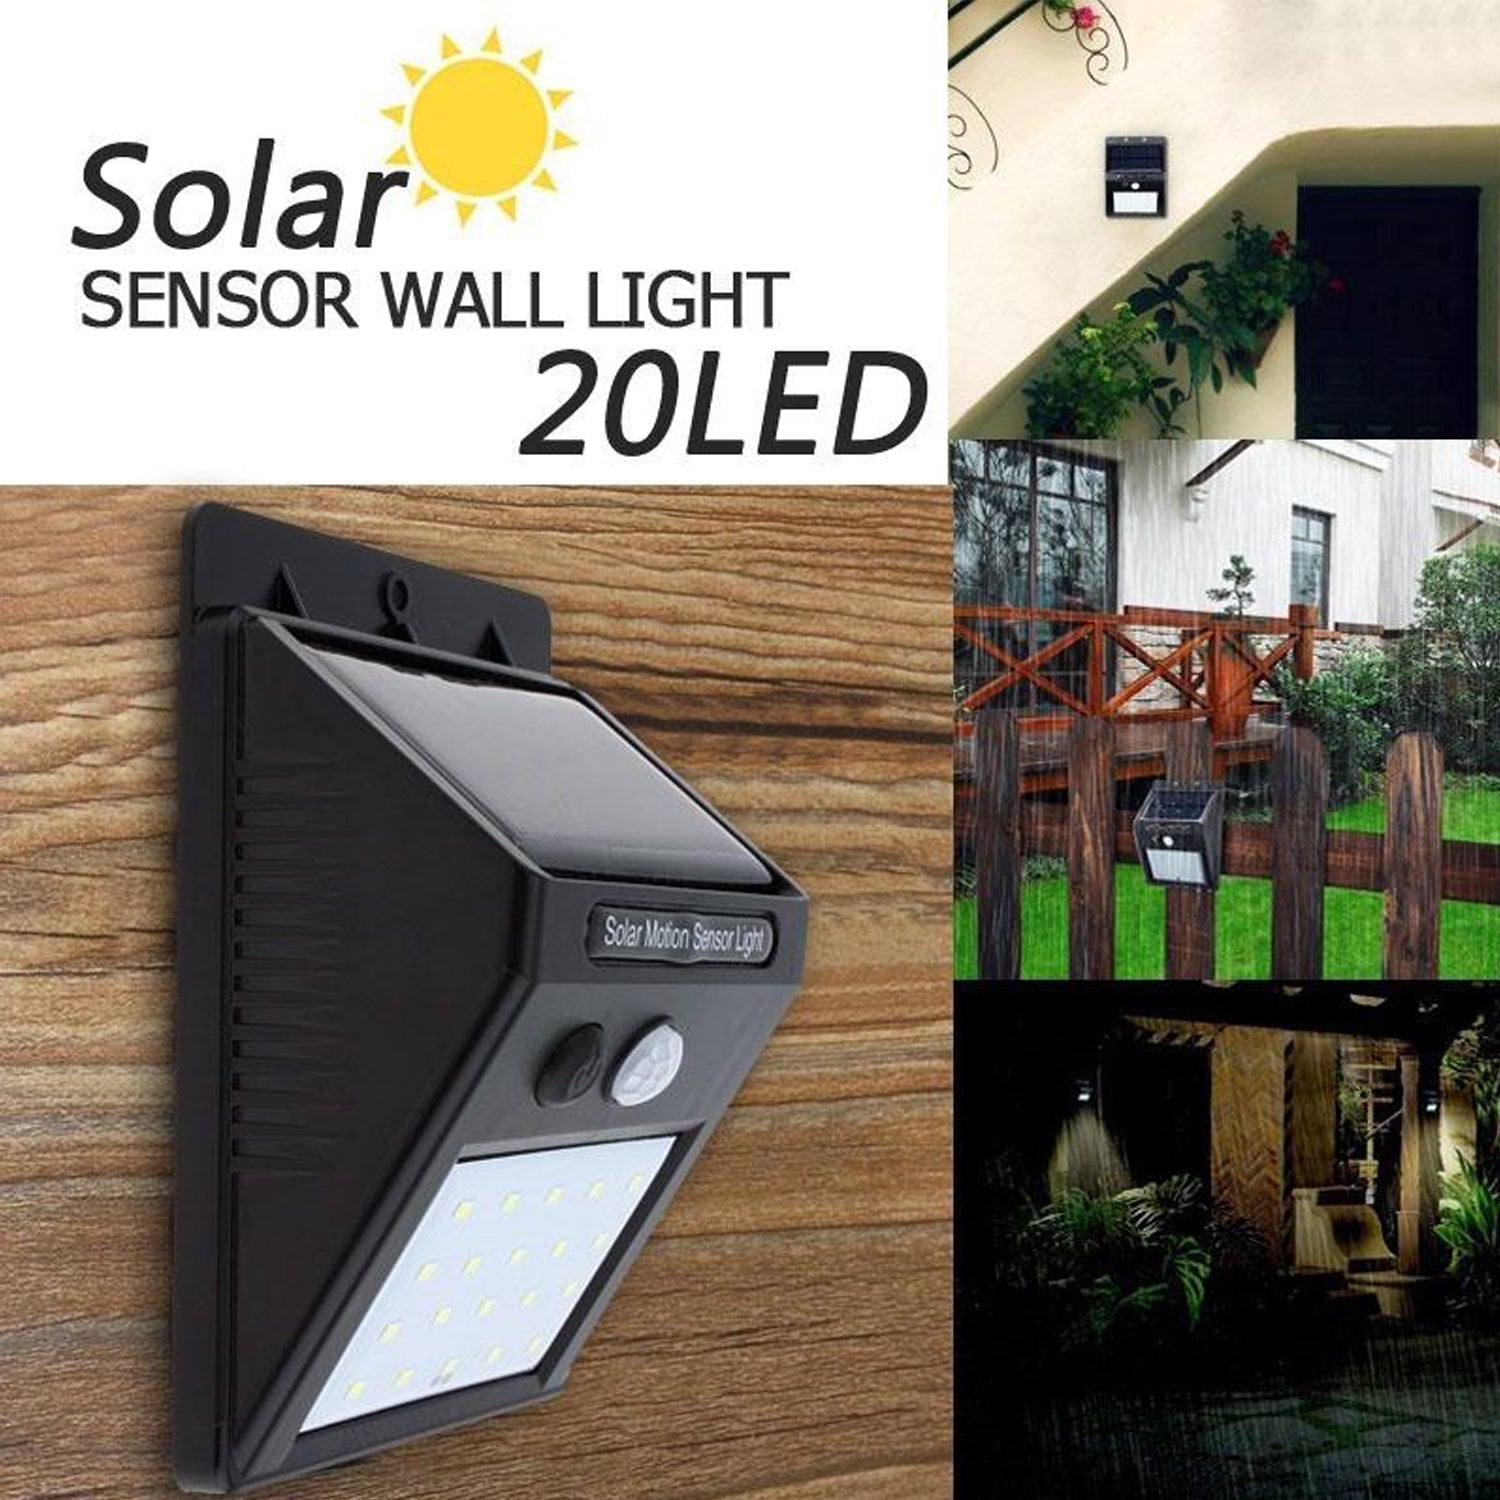 6609 Yellow Solar Wireless Security Motion Sensor LED Night Light for Home Outdoor/Garden Wall. 